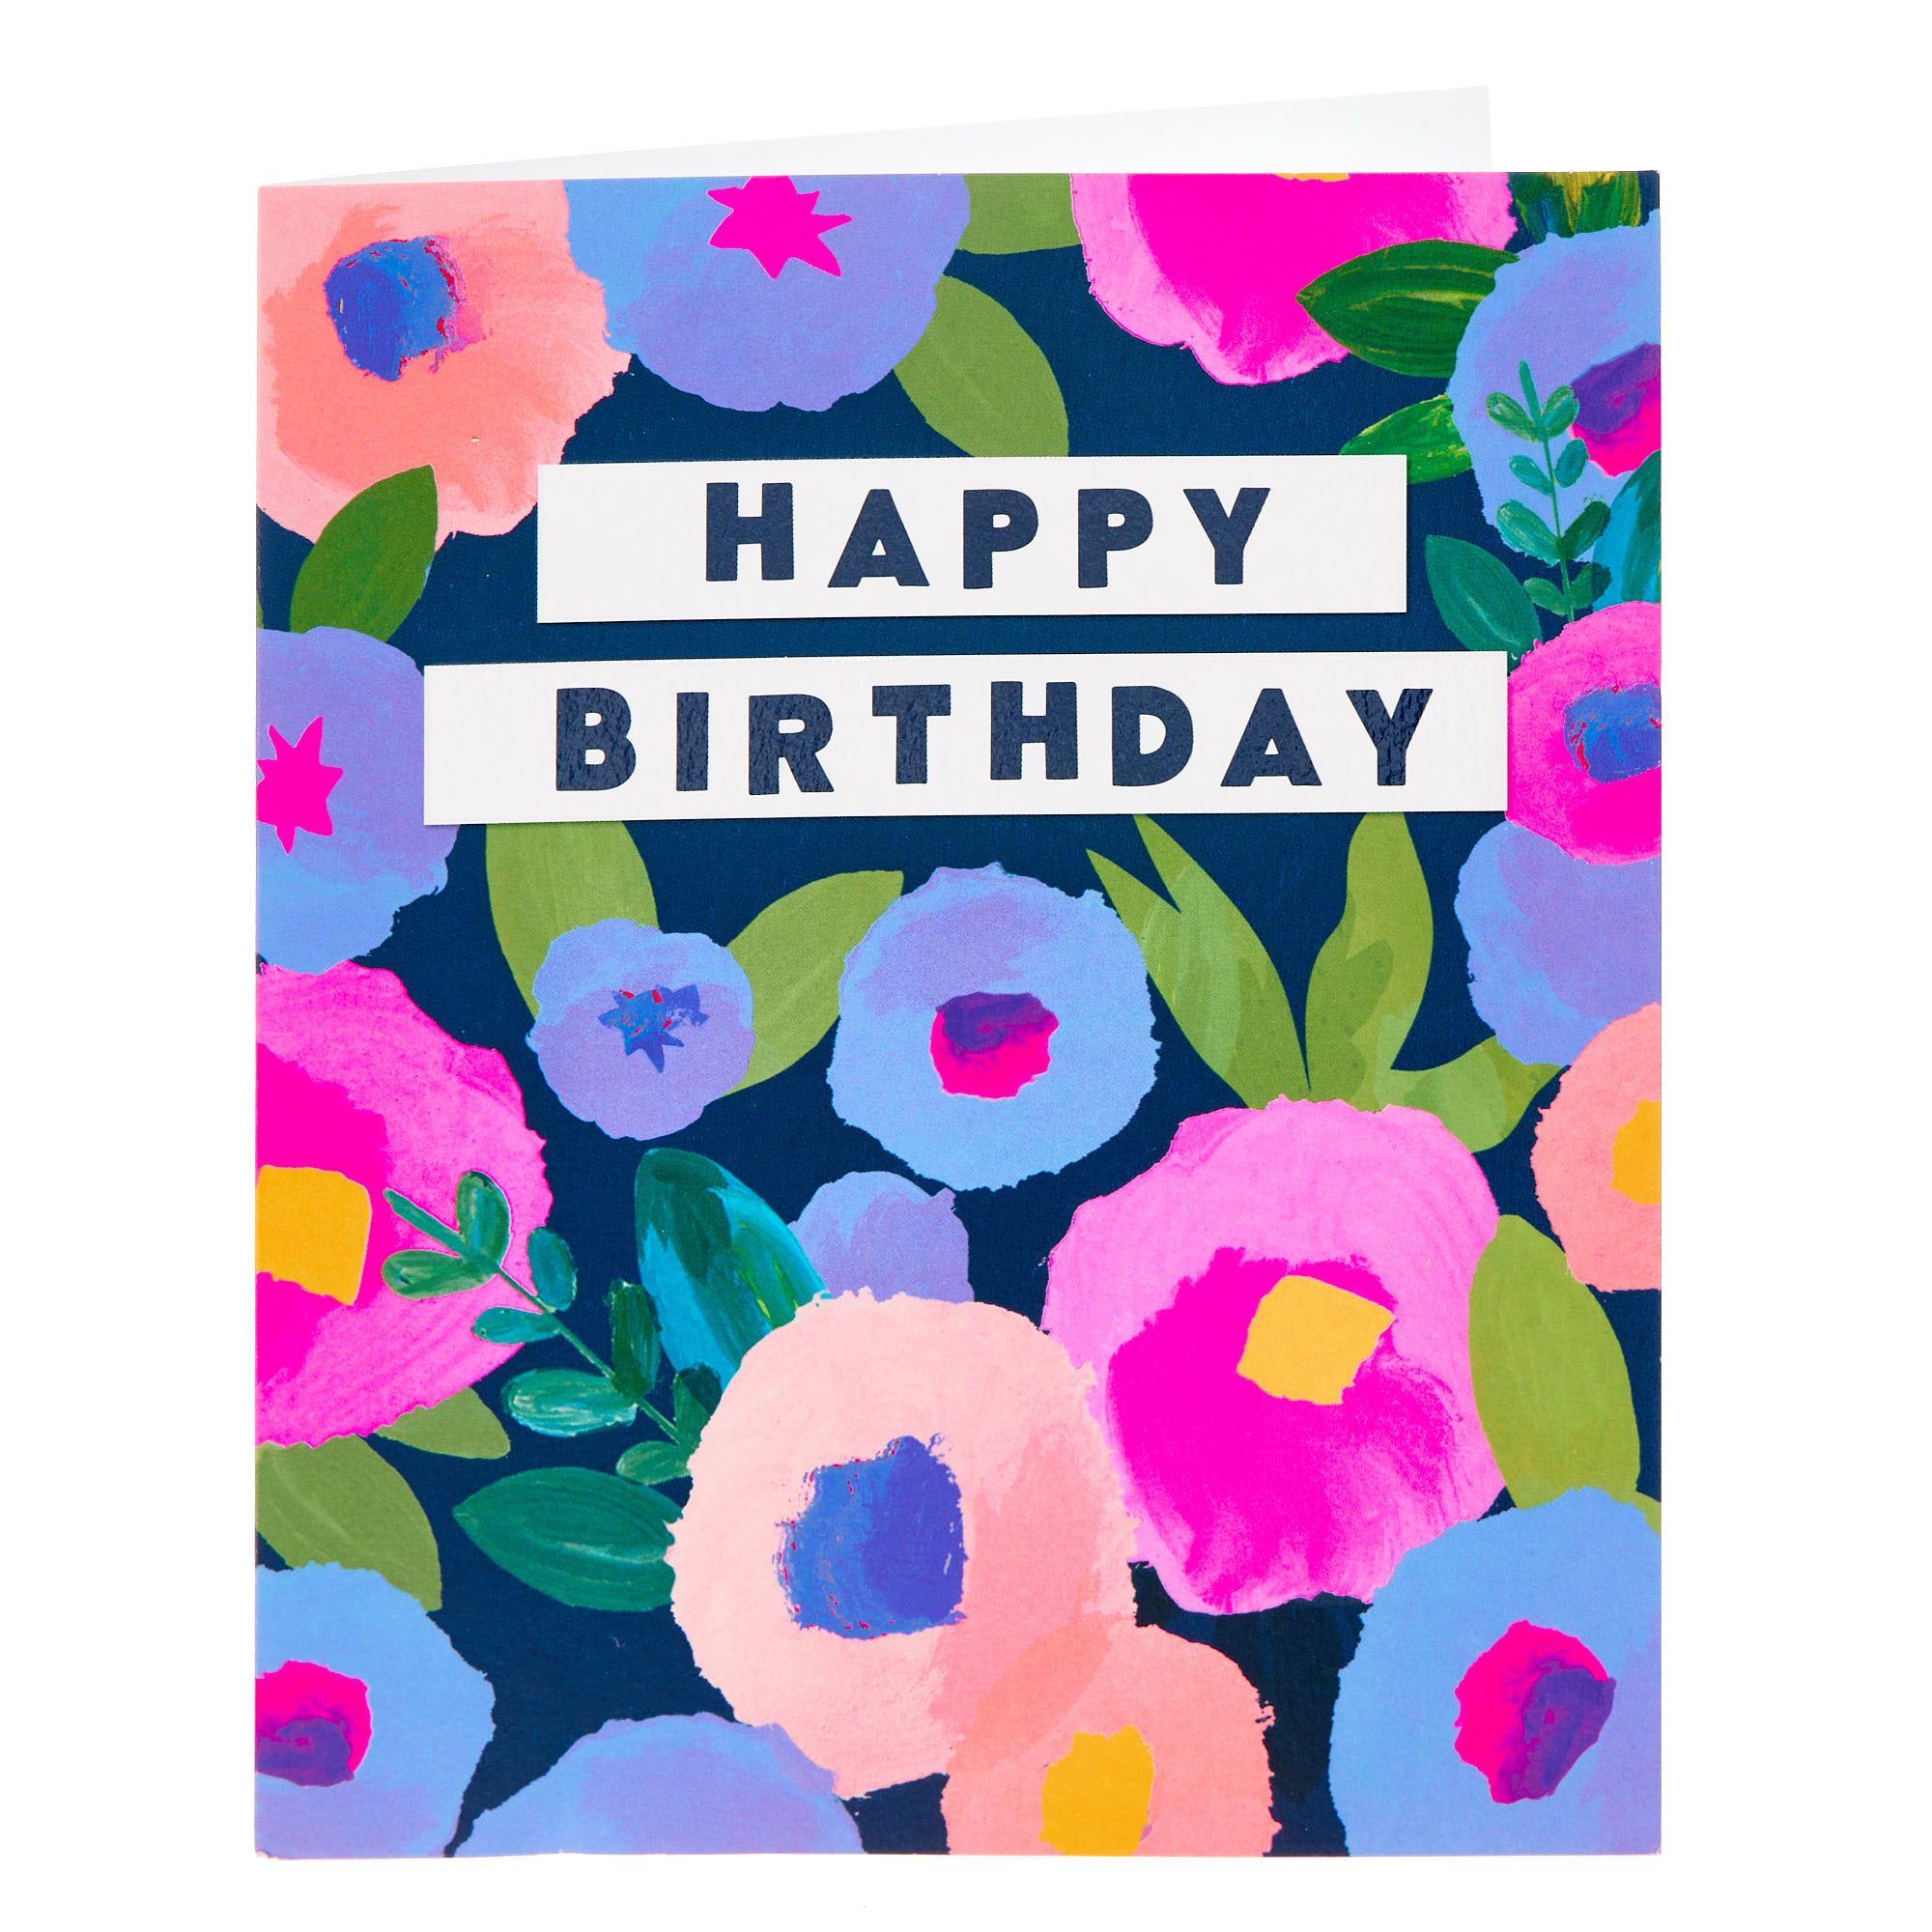 Buy Happy Birthday Bold Floral Birthday Card for GBP 2.99 | Card Factory UK